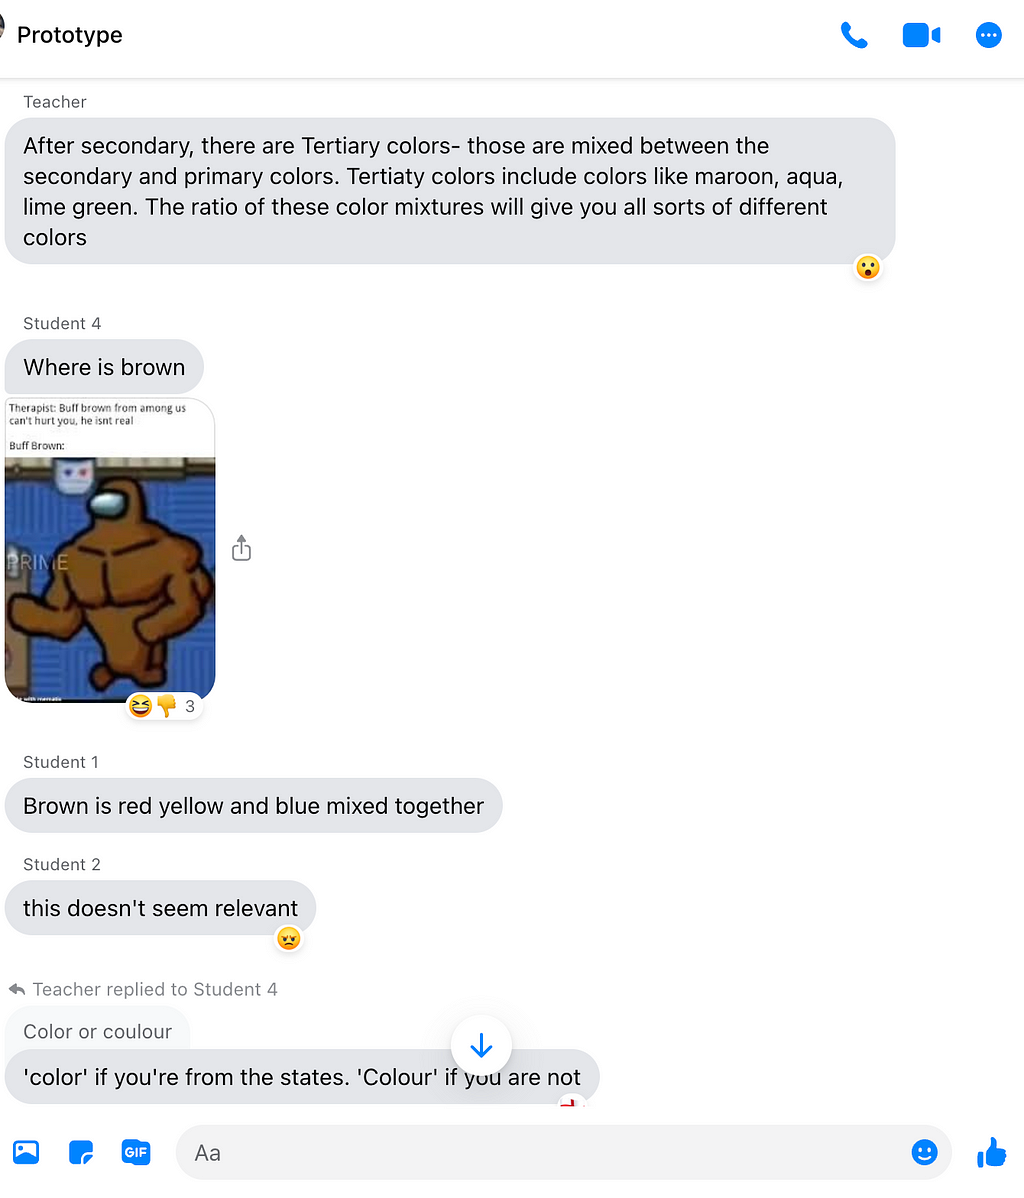 Two screenshots of a group message titled “Prototype” on Facebook messenger. Students 1, 2, and 4 and the Teacher chat about color theory, with Student 4 providing images from popular culture such as Spongebob miming a rainbow and the “Buff Brown” Among Us character.